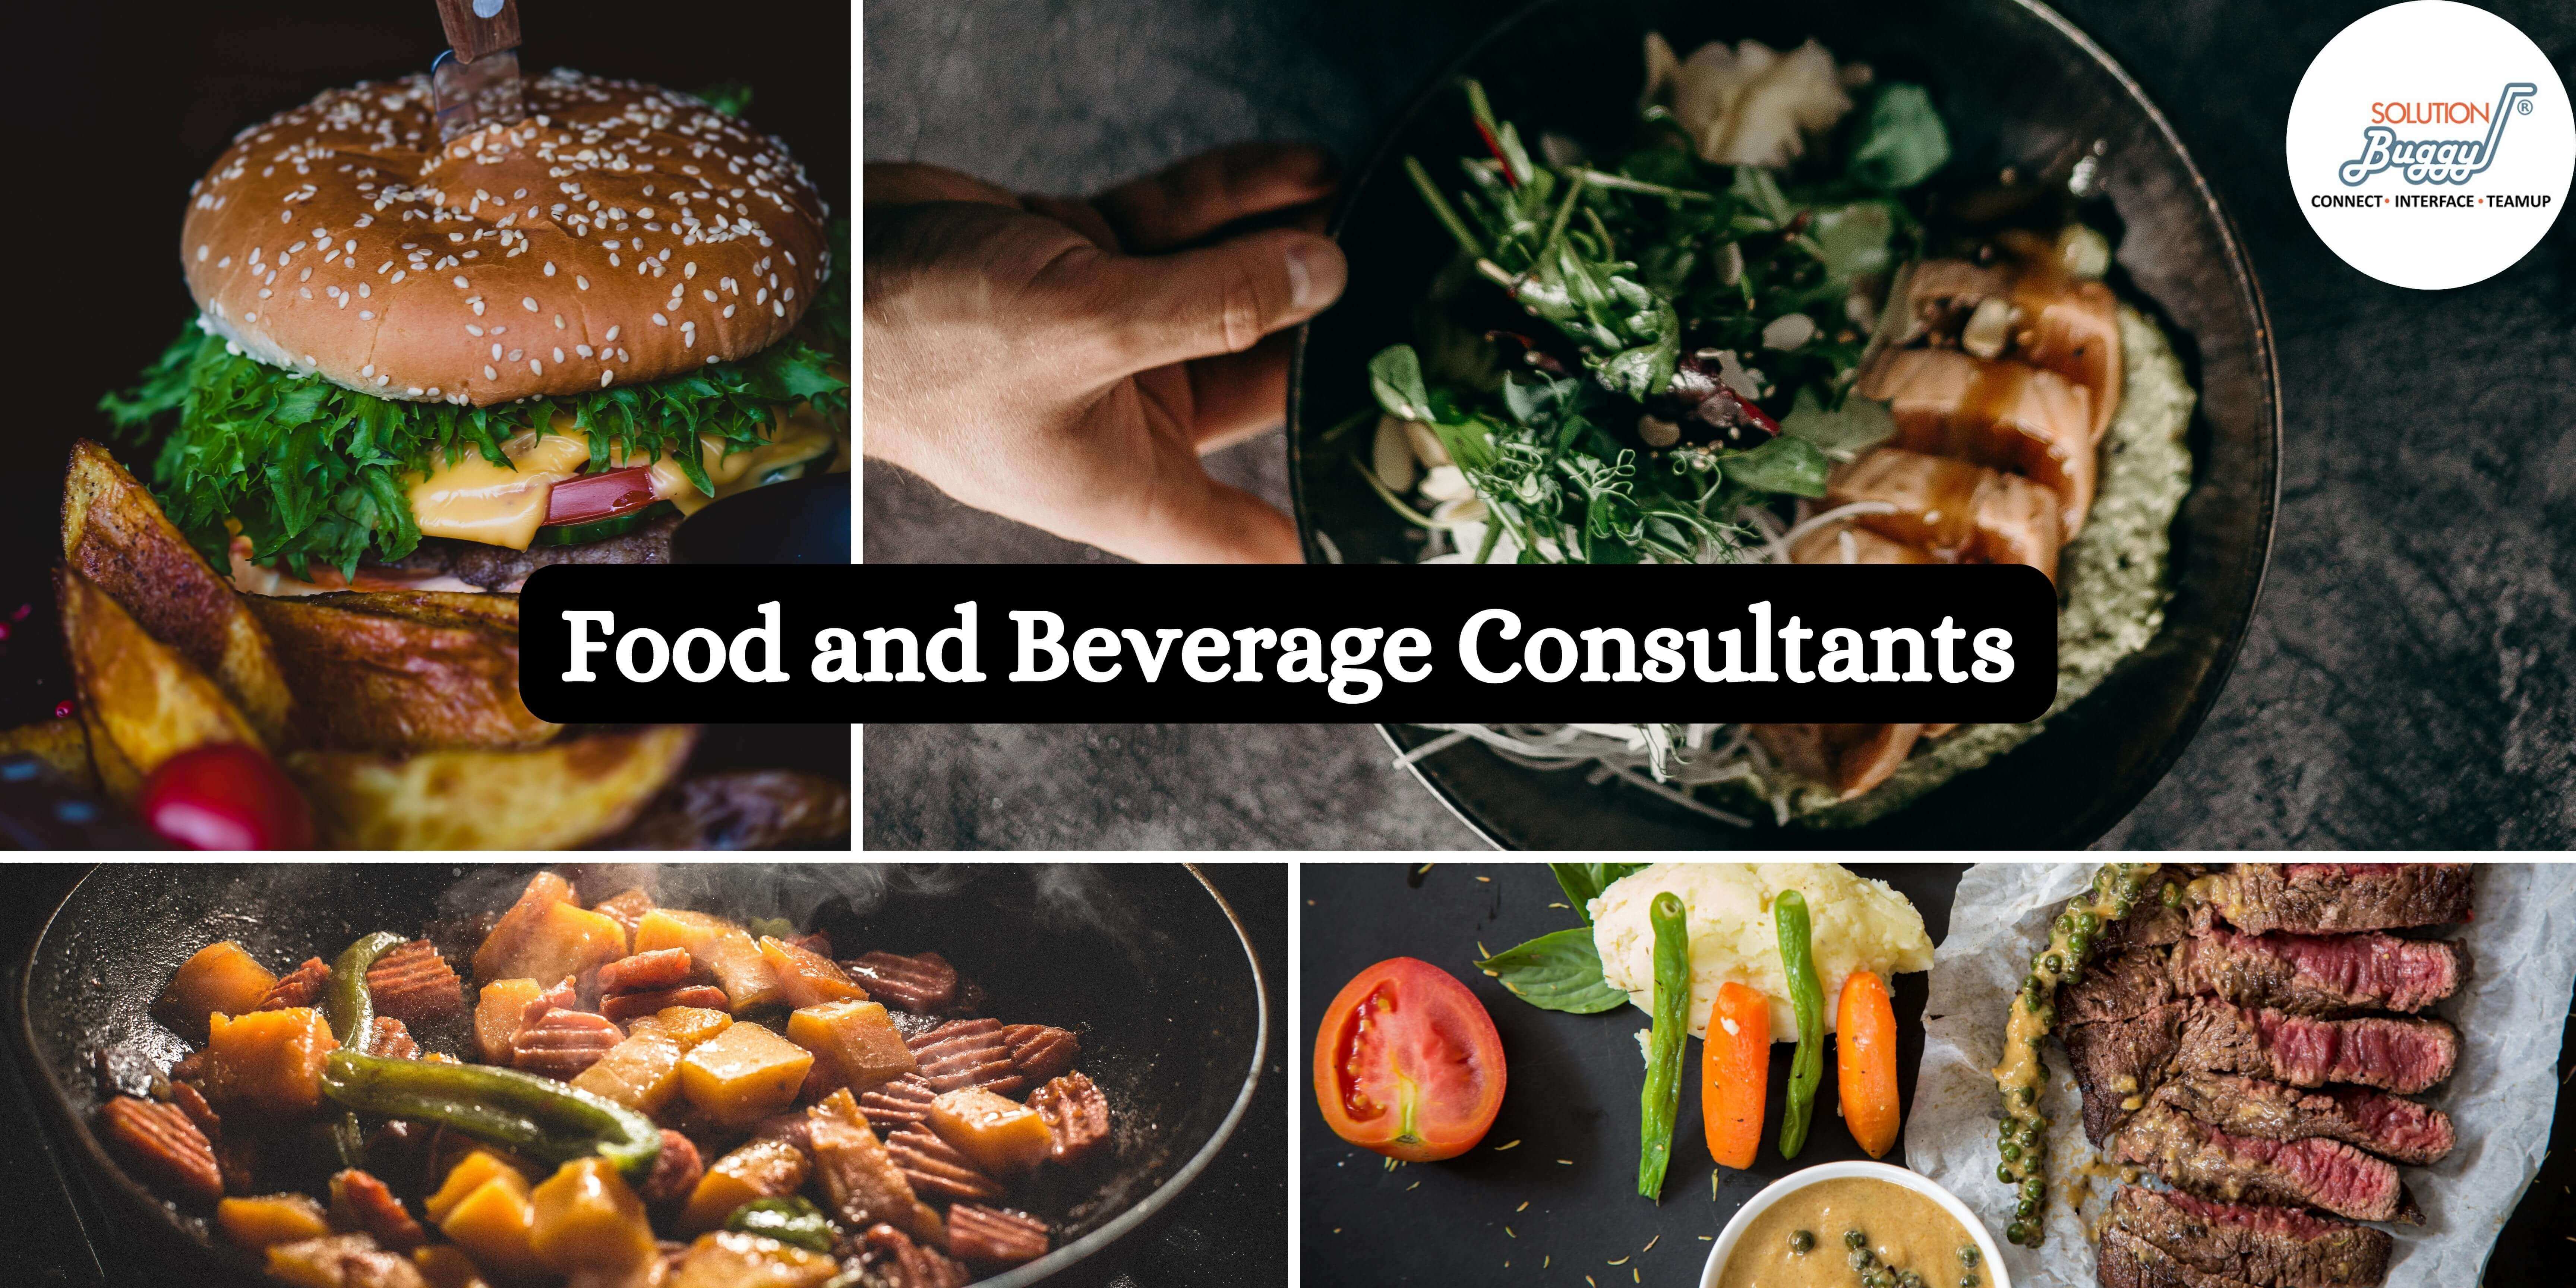 Food and Beverage Consultants